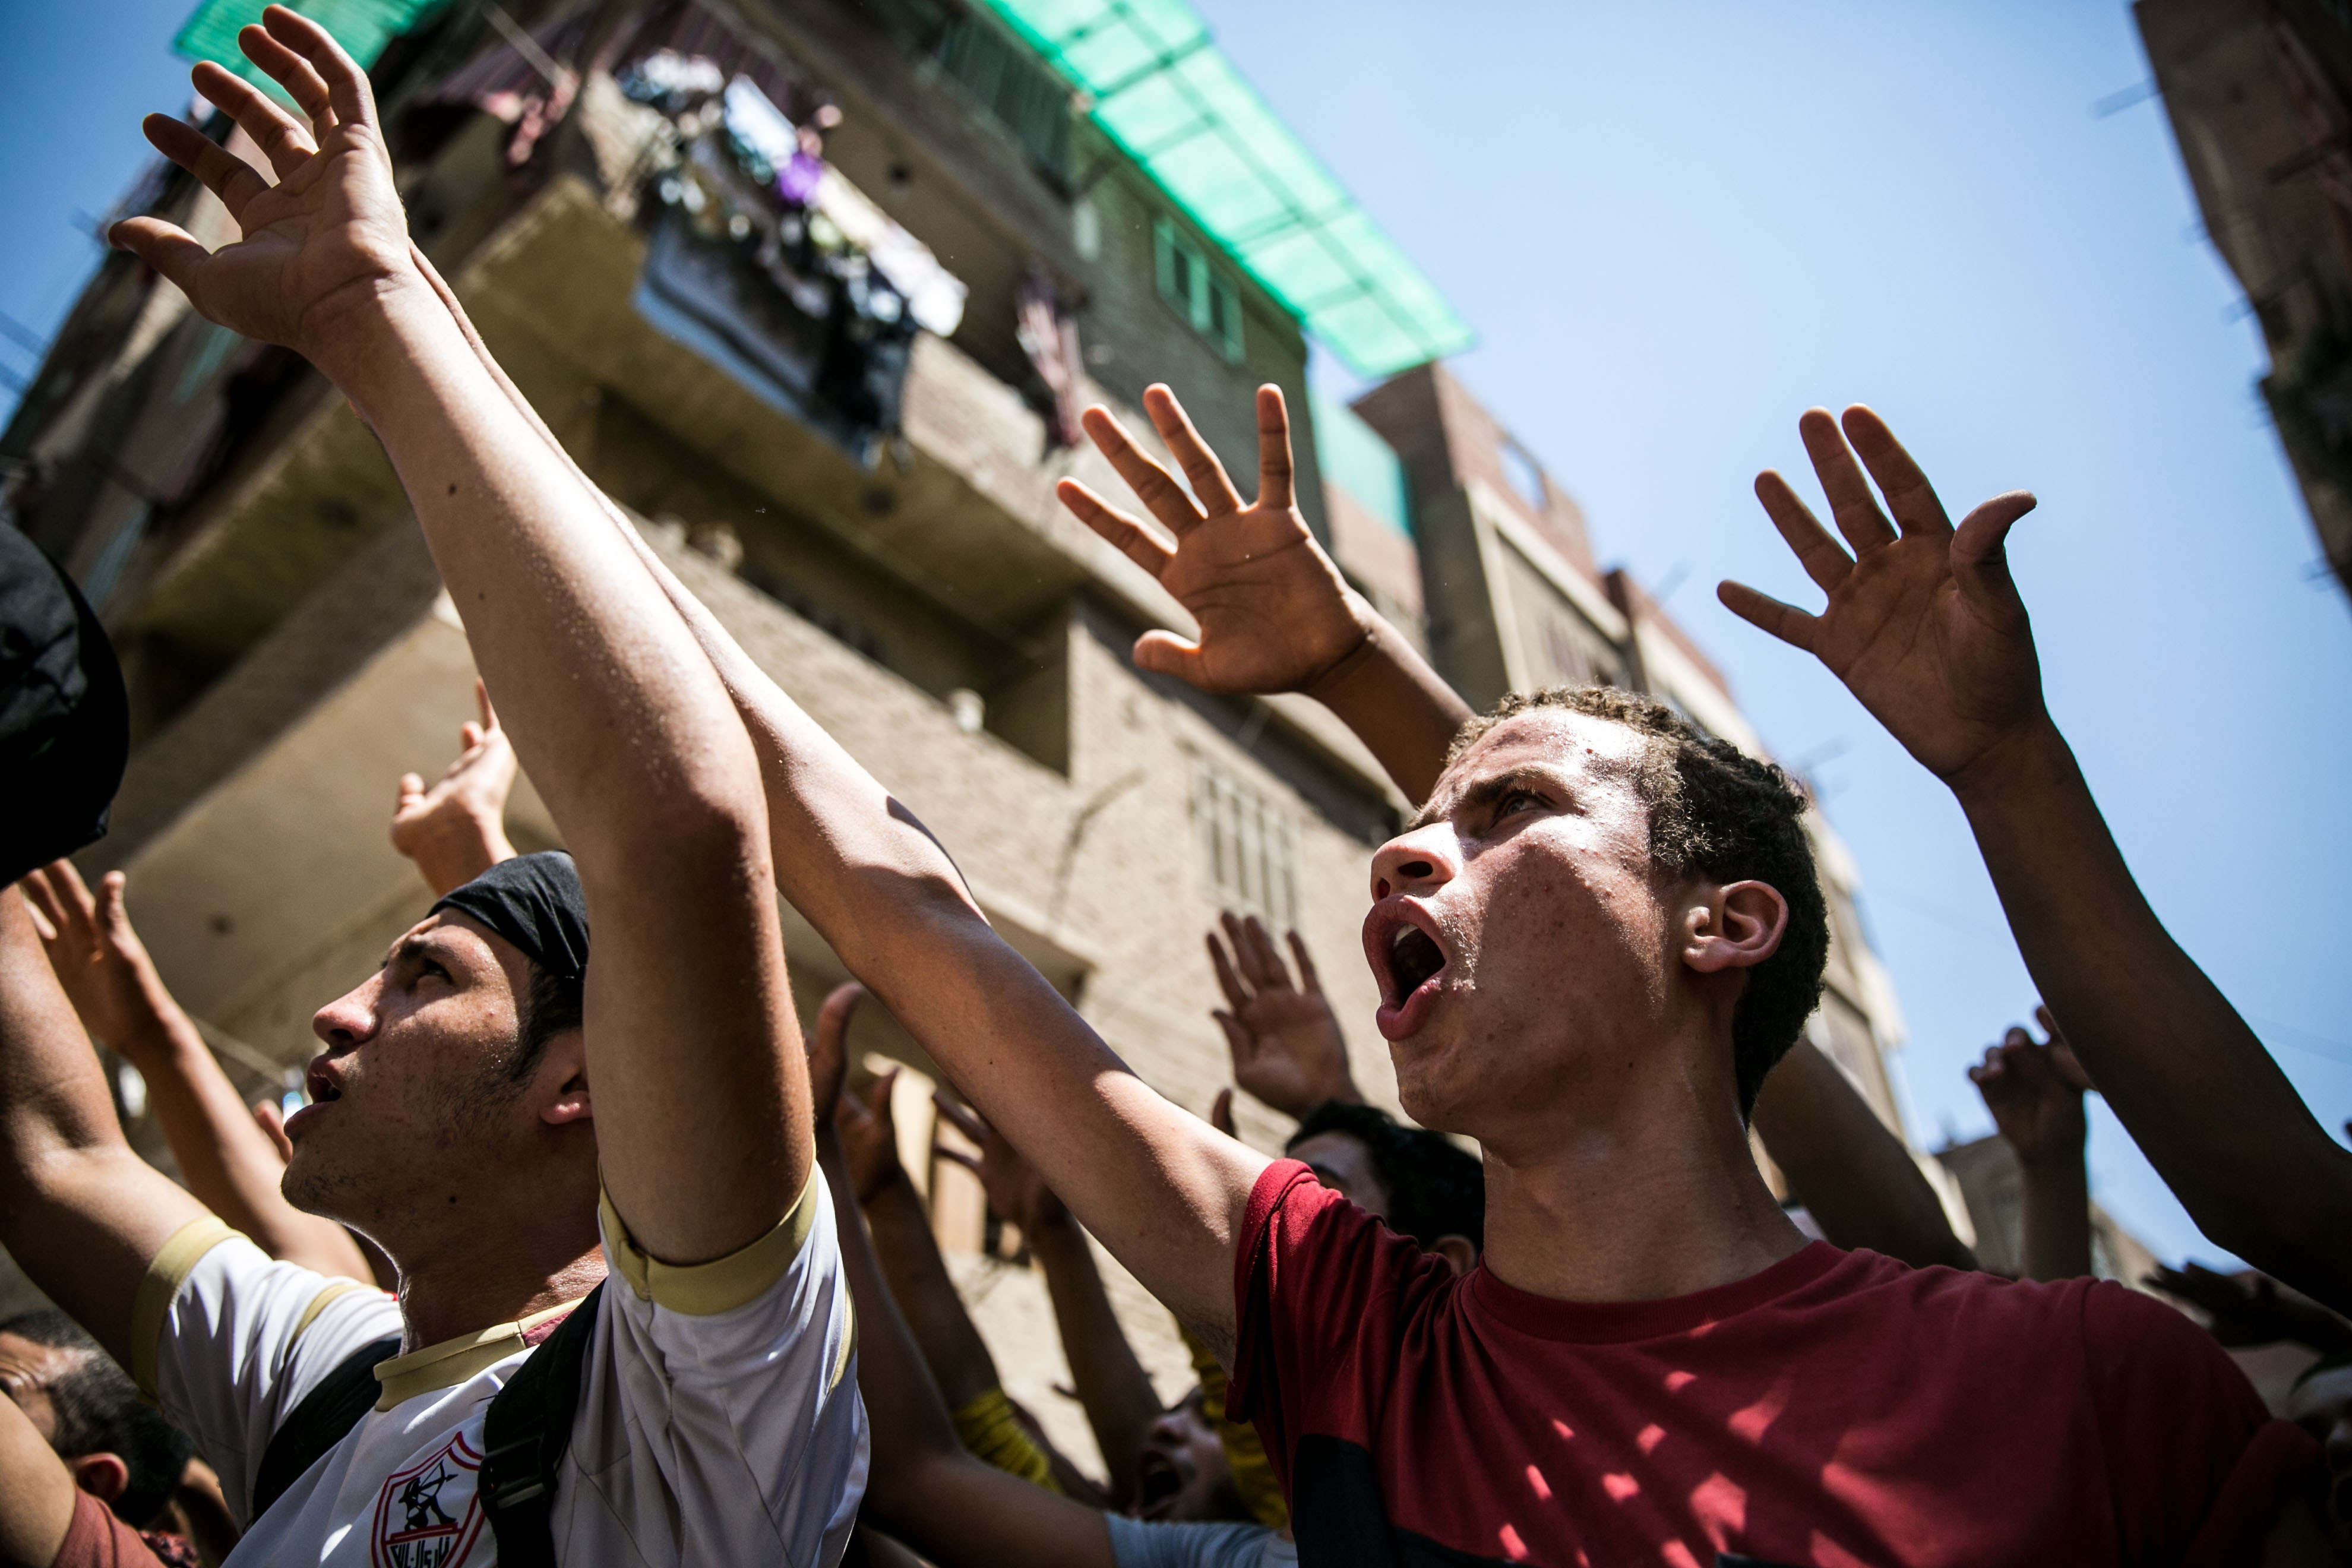 Anticoup protesters shout slogans as they march at al-Haram Street during a demonstration on Aug. 14, 2014, in Cairo, marking the first anniversary of the killing of hundreds of Morsi supporters by security forces (Anadolu Agency—Getty Images)